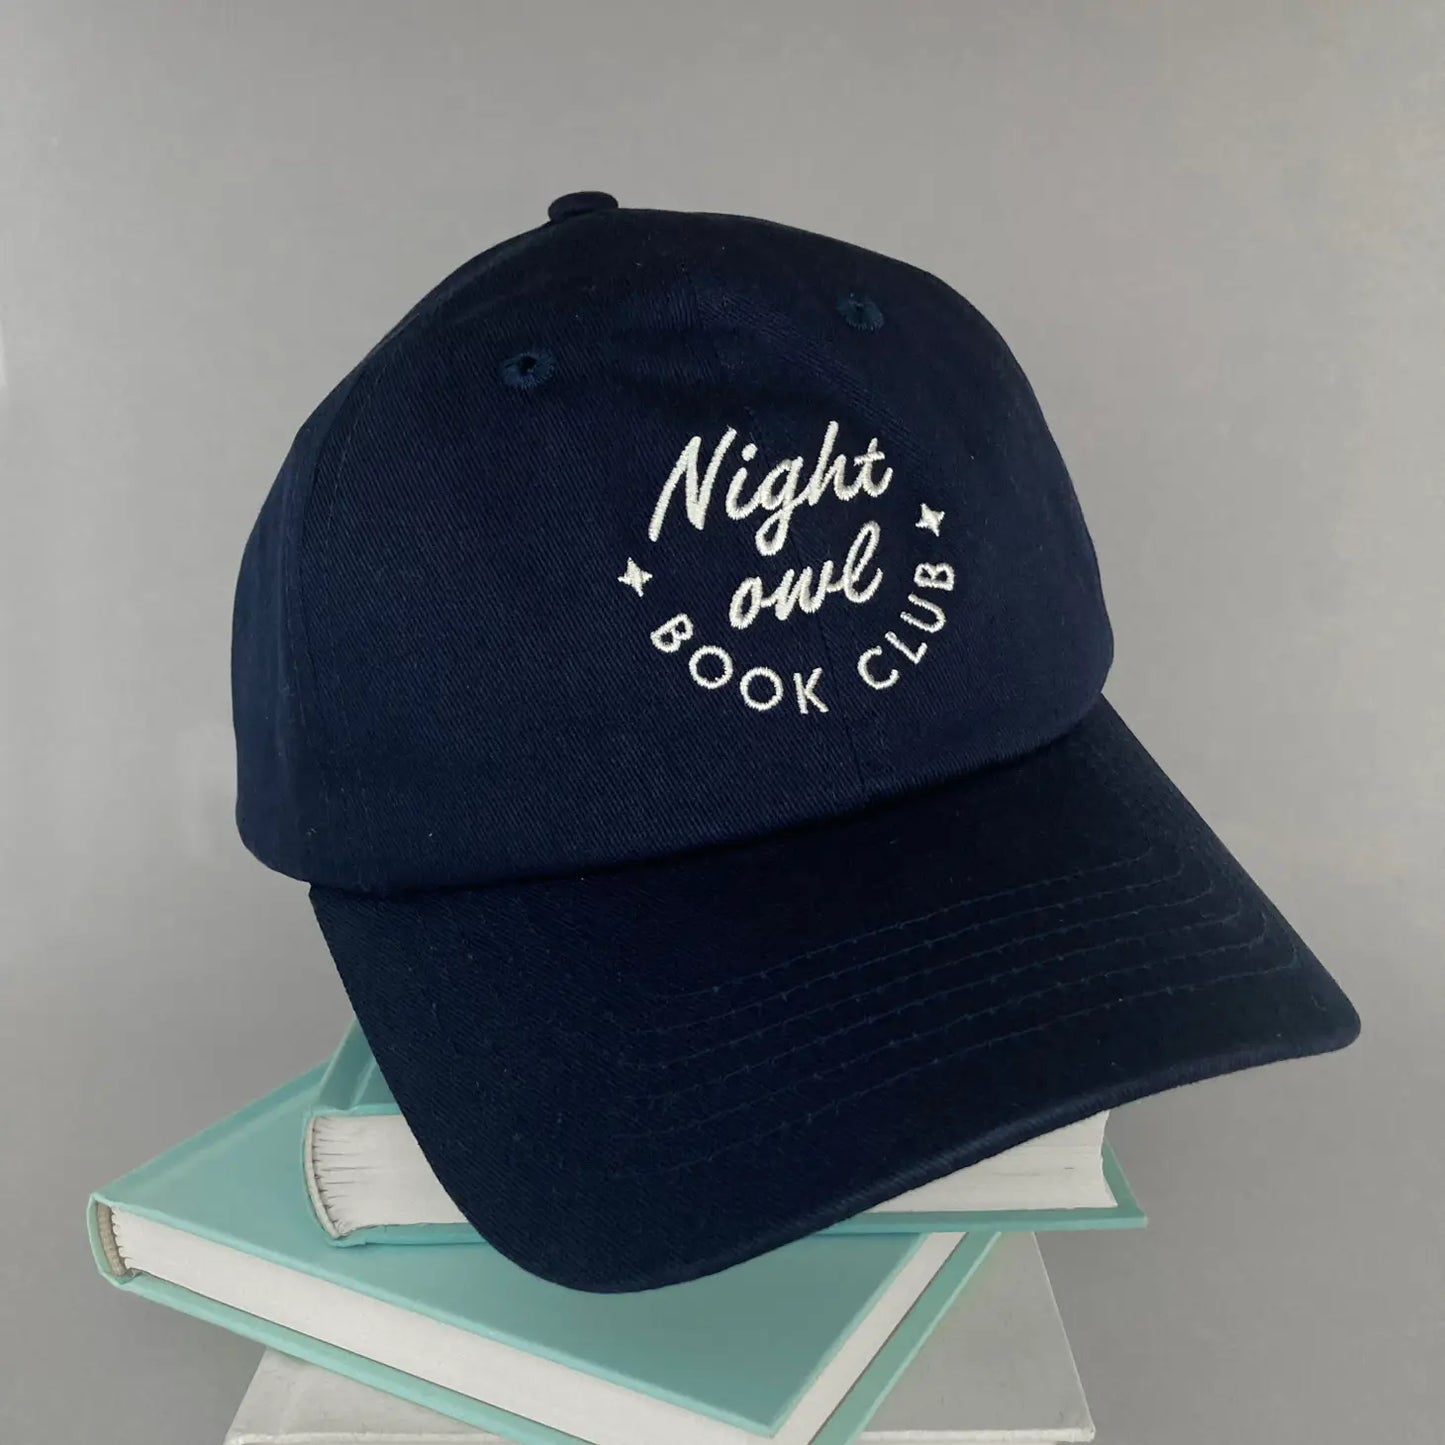 Night Owl Book Club Embroidered Dad Hat